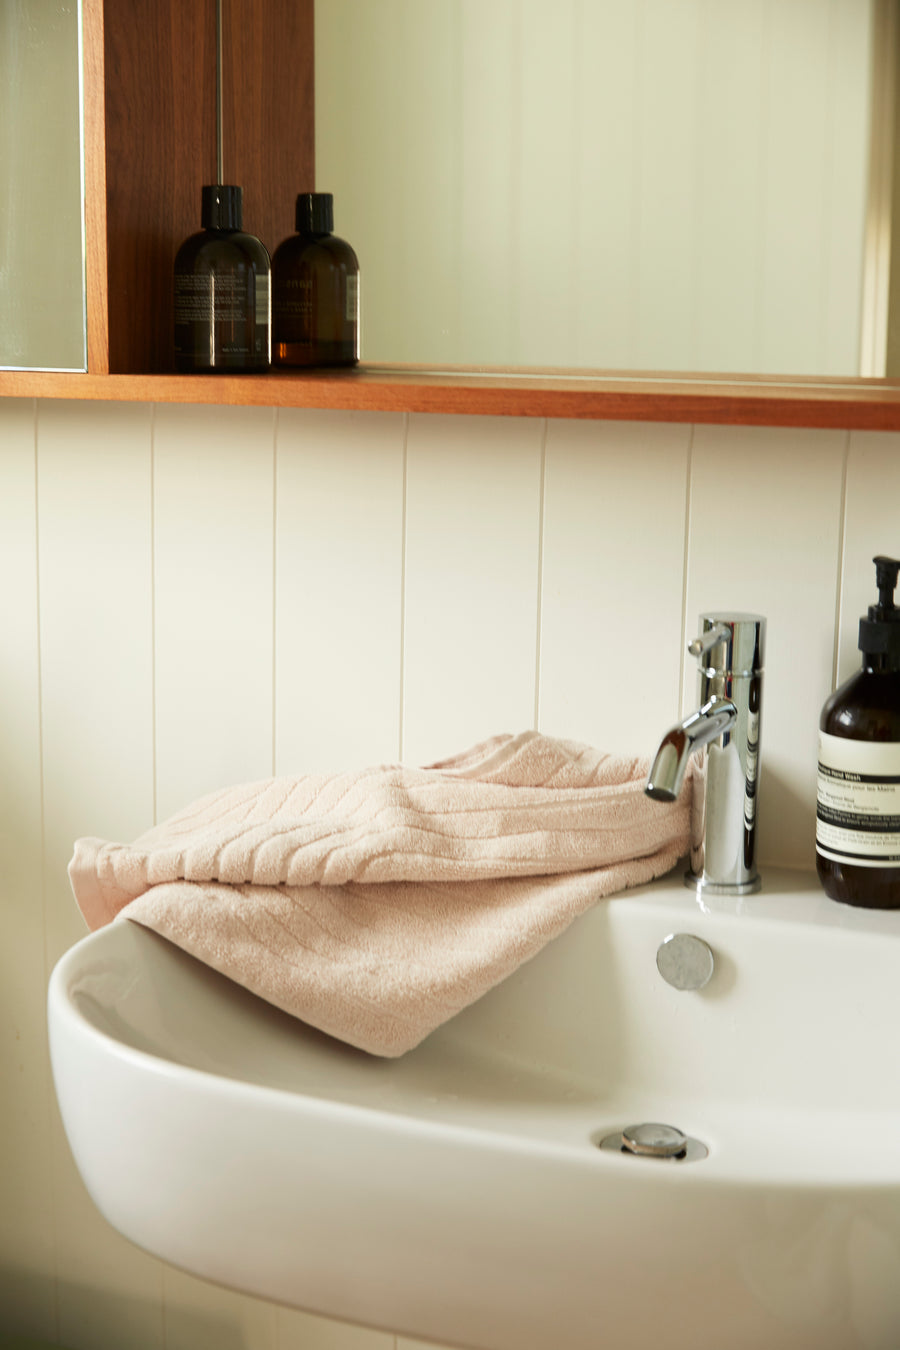 BAINA Clovelly Hand Towel - Clay | The Source - Leader in Luxury Kitchen & Bathroom Products in Adelaide, Australia